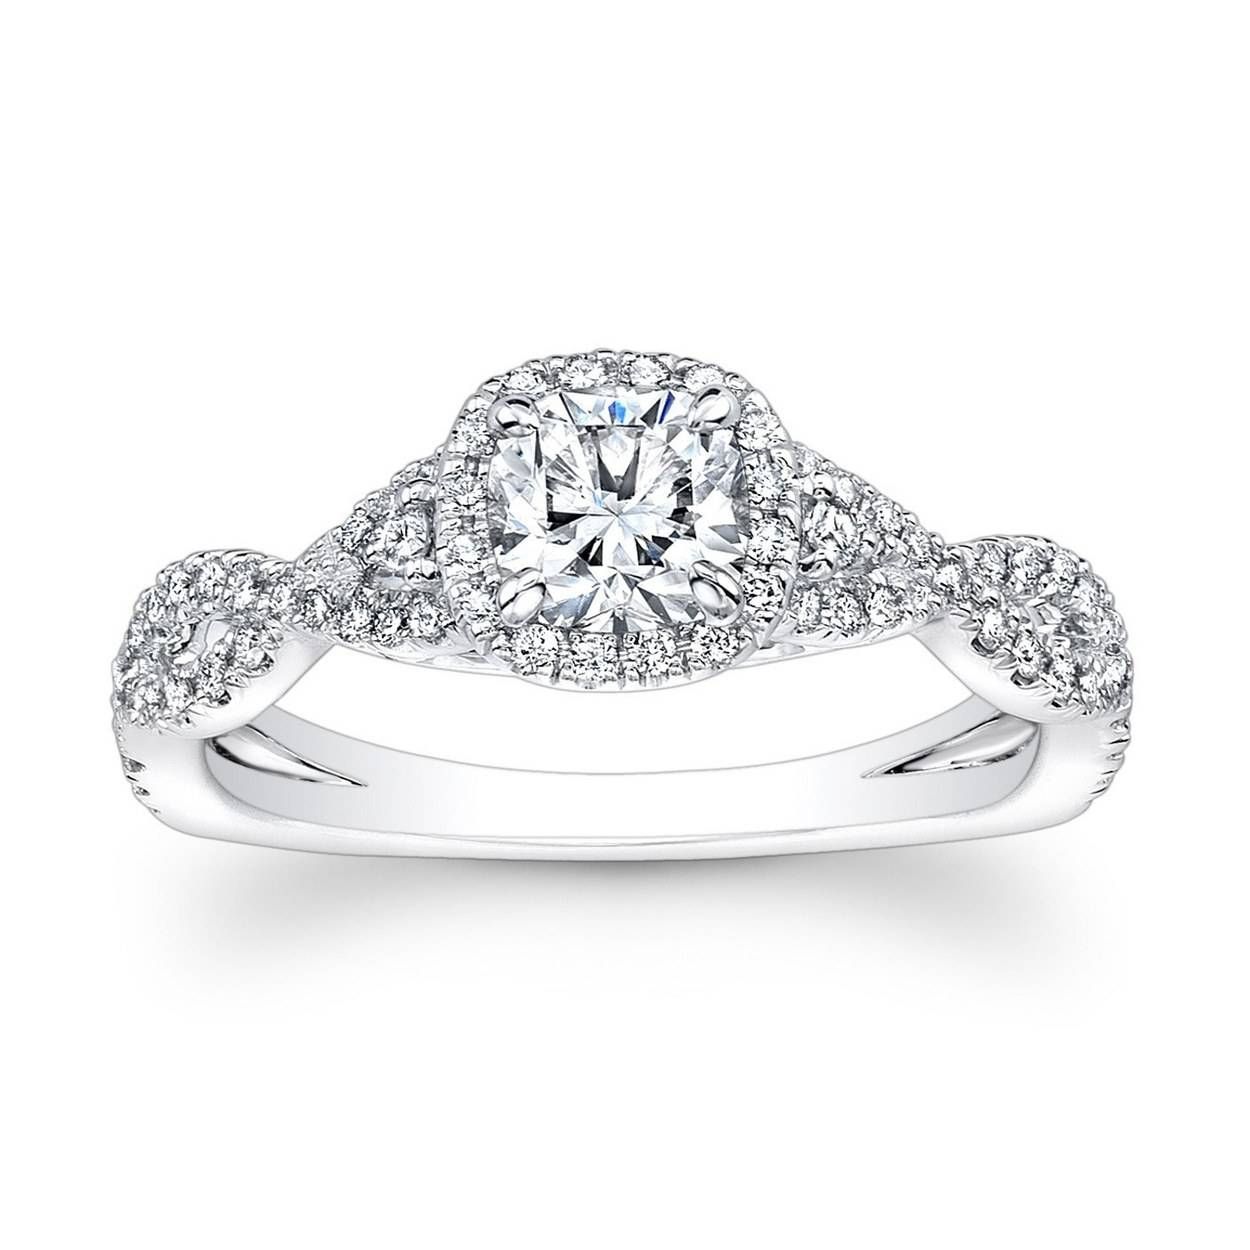 62 Diamond Engagement Rings Under $5,000 | Glamour Pertaining To Most Popular Cushion Cut Anniversary Rings (View 19 of 25)